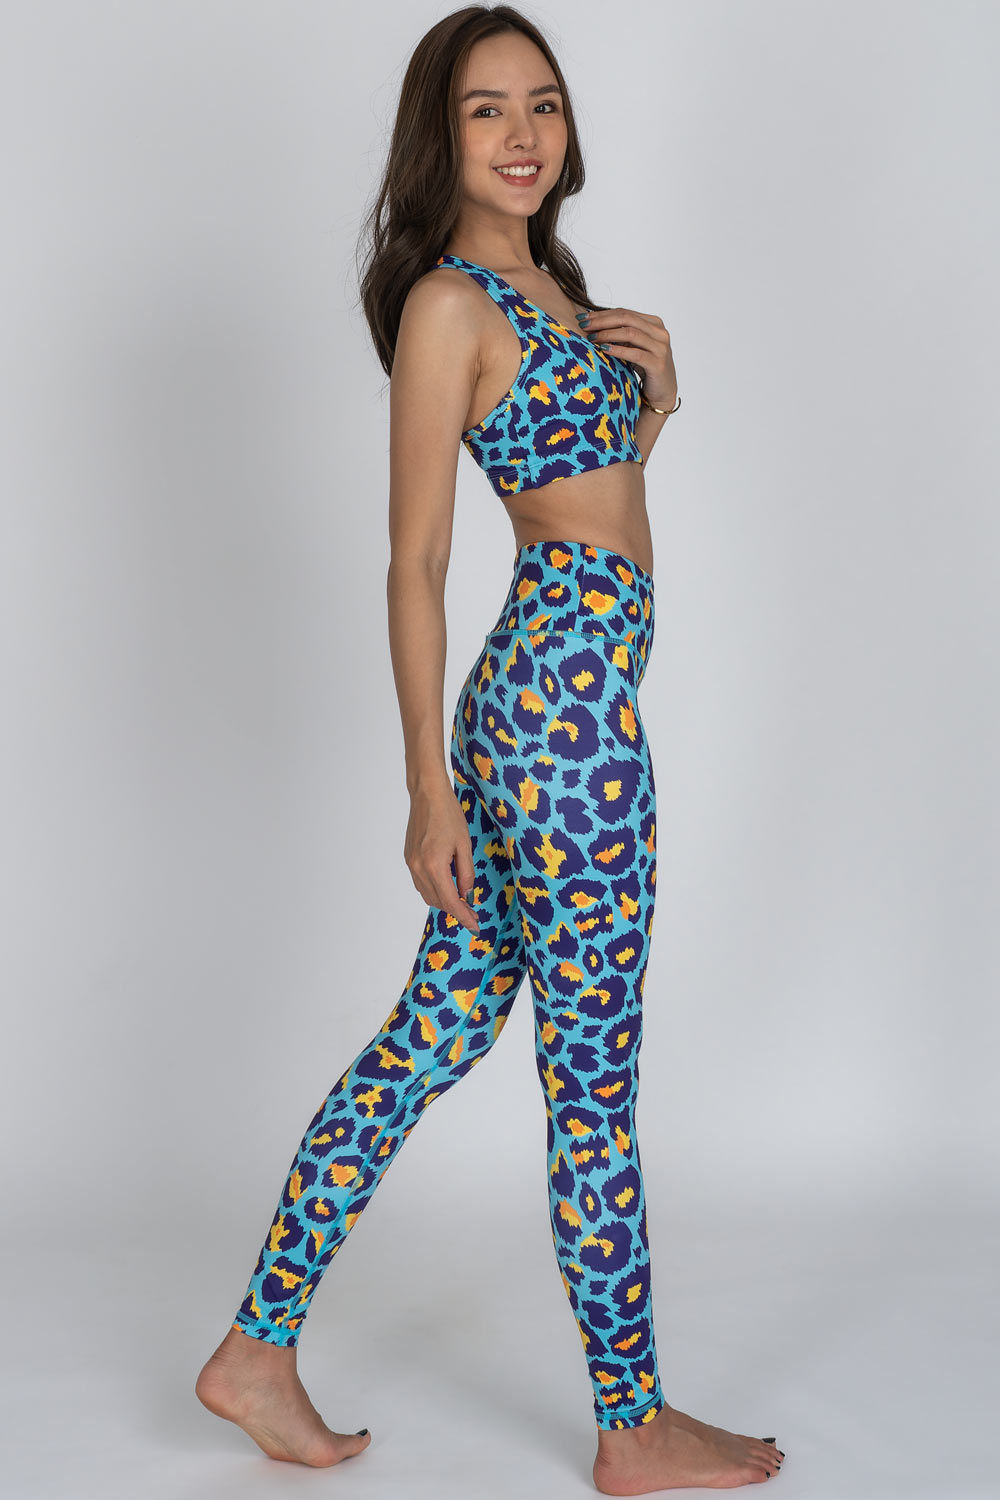 Blue sports leggings with leopard print